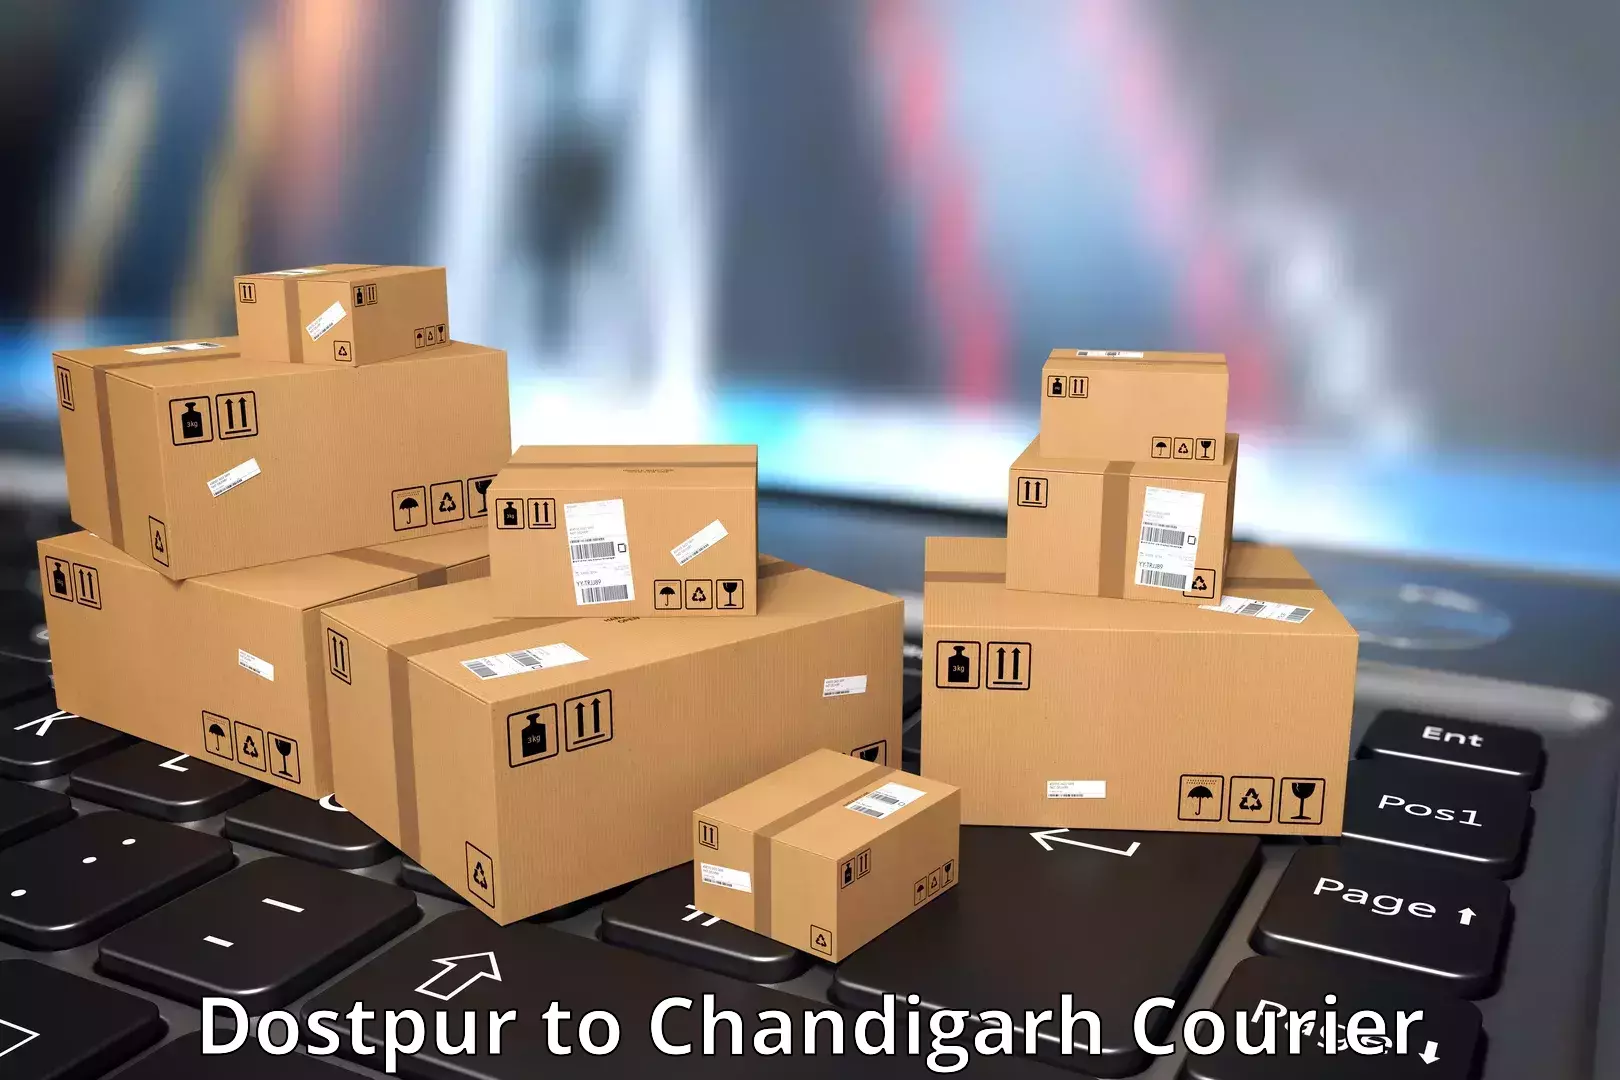 High-capacity courier solutions Dostpur to Chandigarh